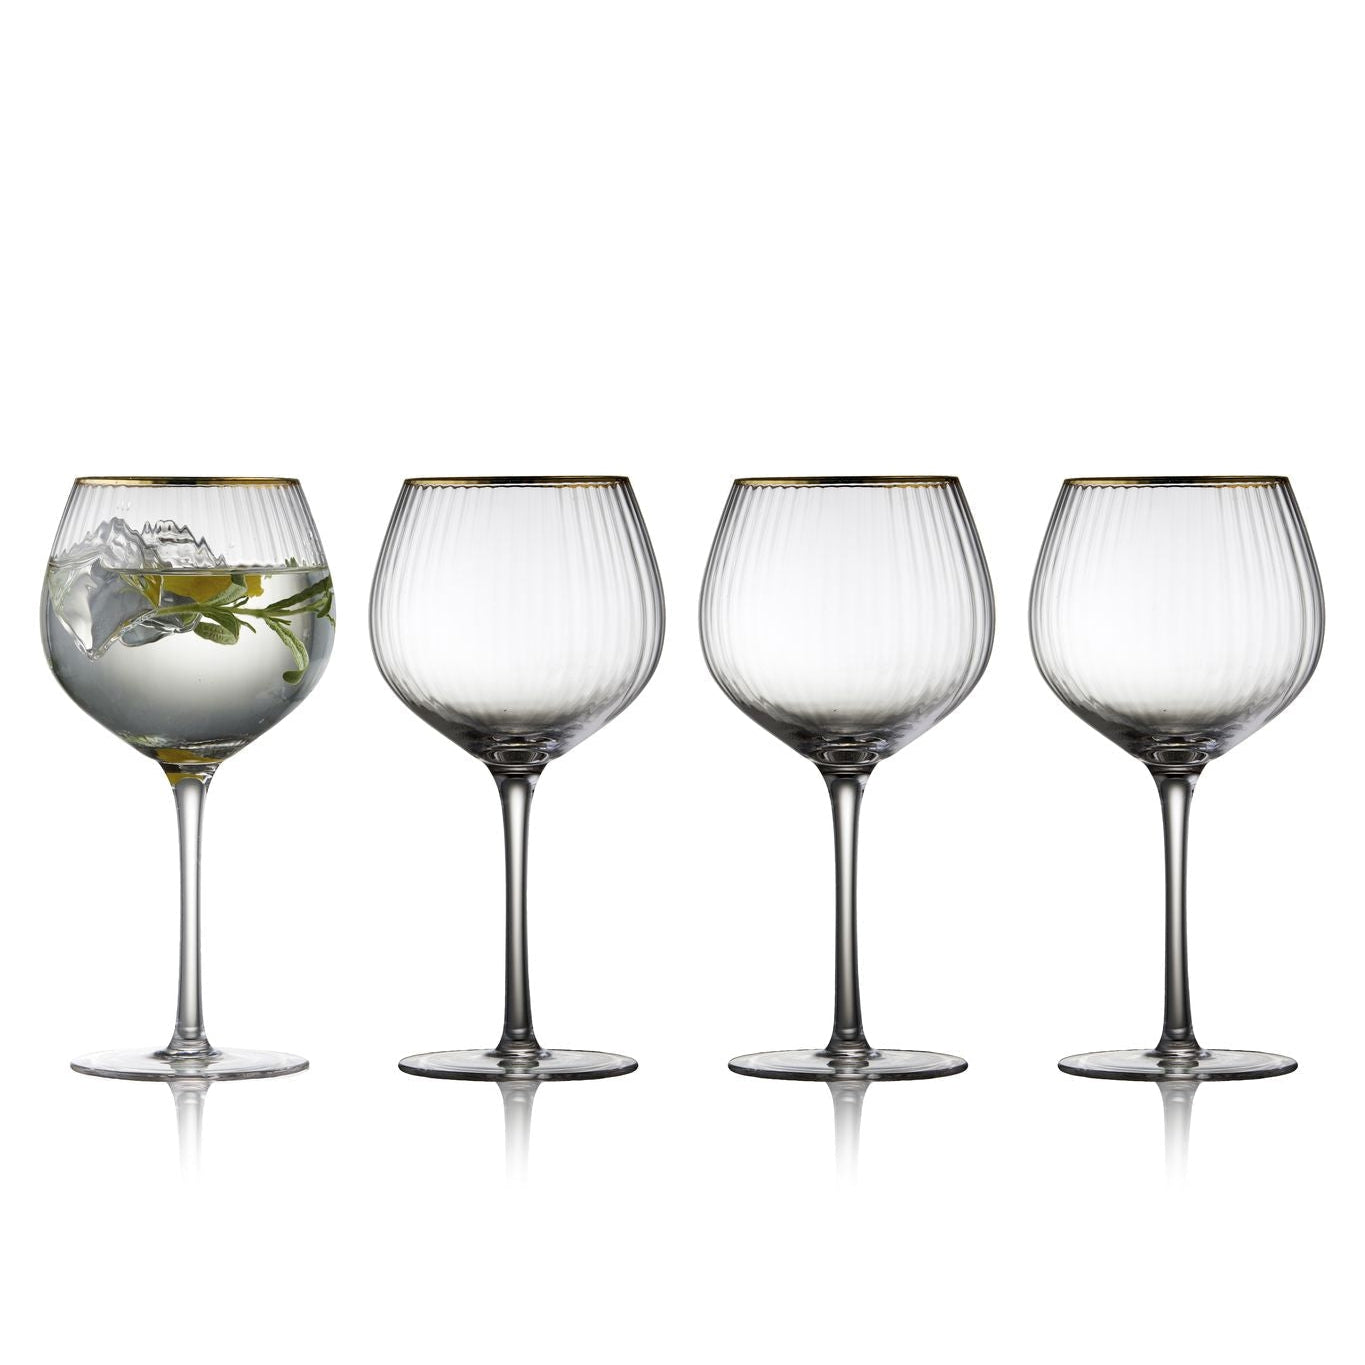 Lyngby Glas Palermo Gold Gin & Tonic Glass 65 CL, 4 kpl.